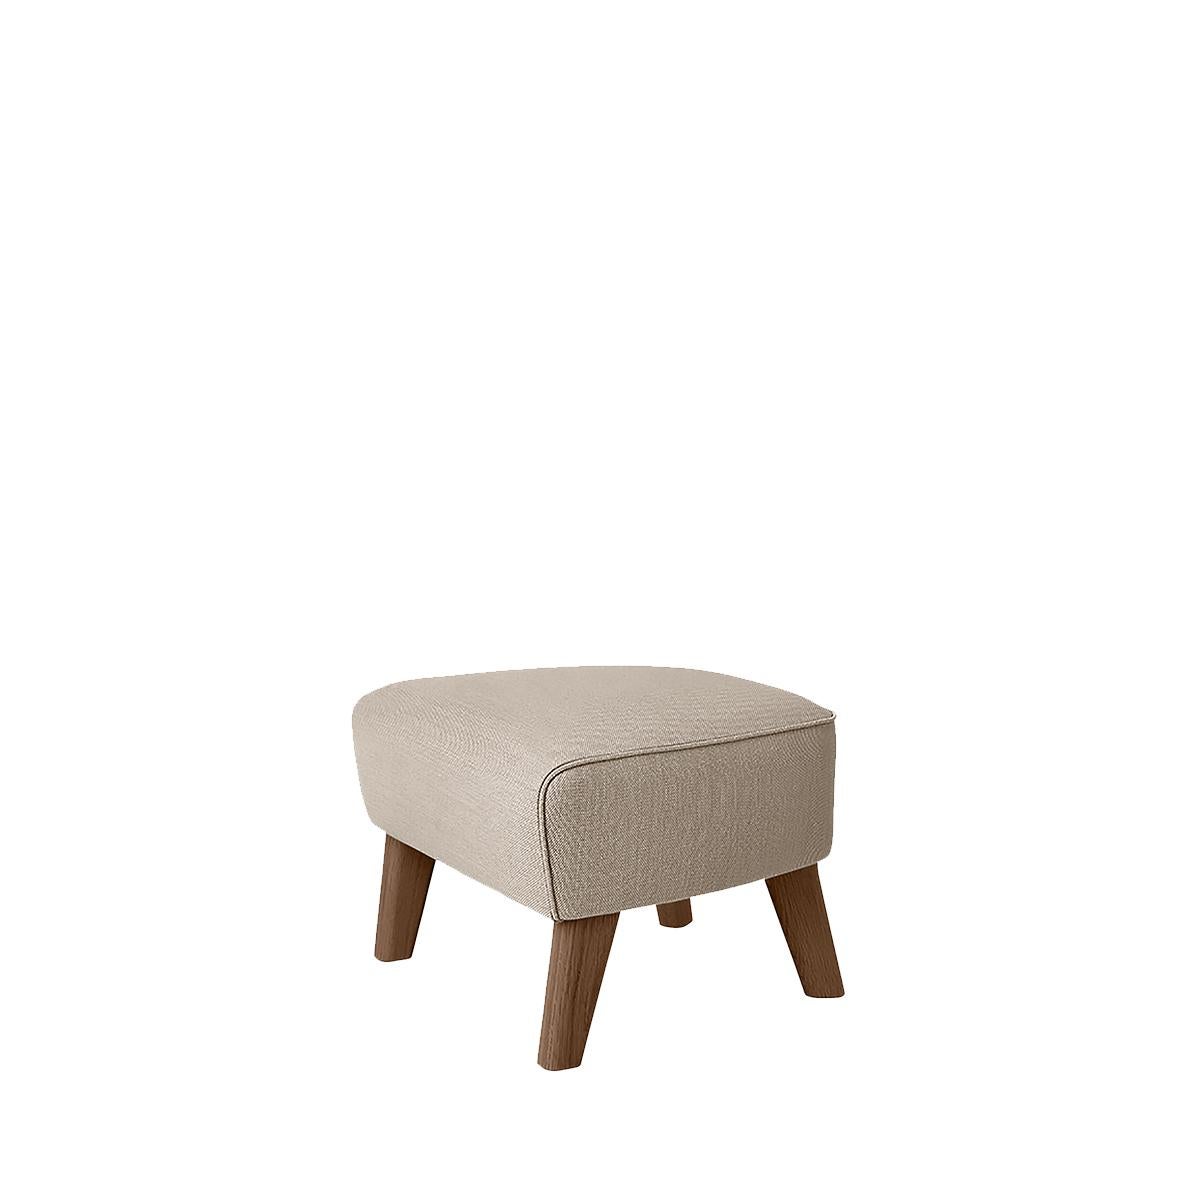 Beige and smoked oak Sahco Zero footstool by Lassen
Dimensions: W 56 x D 58 x H 40 cm 
Materials: Textile
Also available: other colors available.

The My Own Chair Footstool has been designed in the same spirit as Flemming Lassen’s original